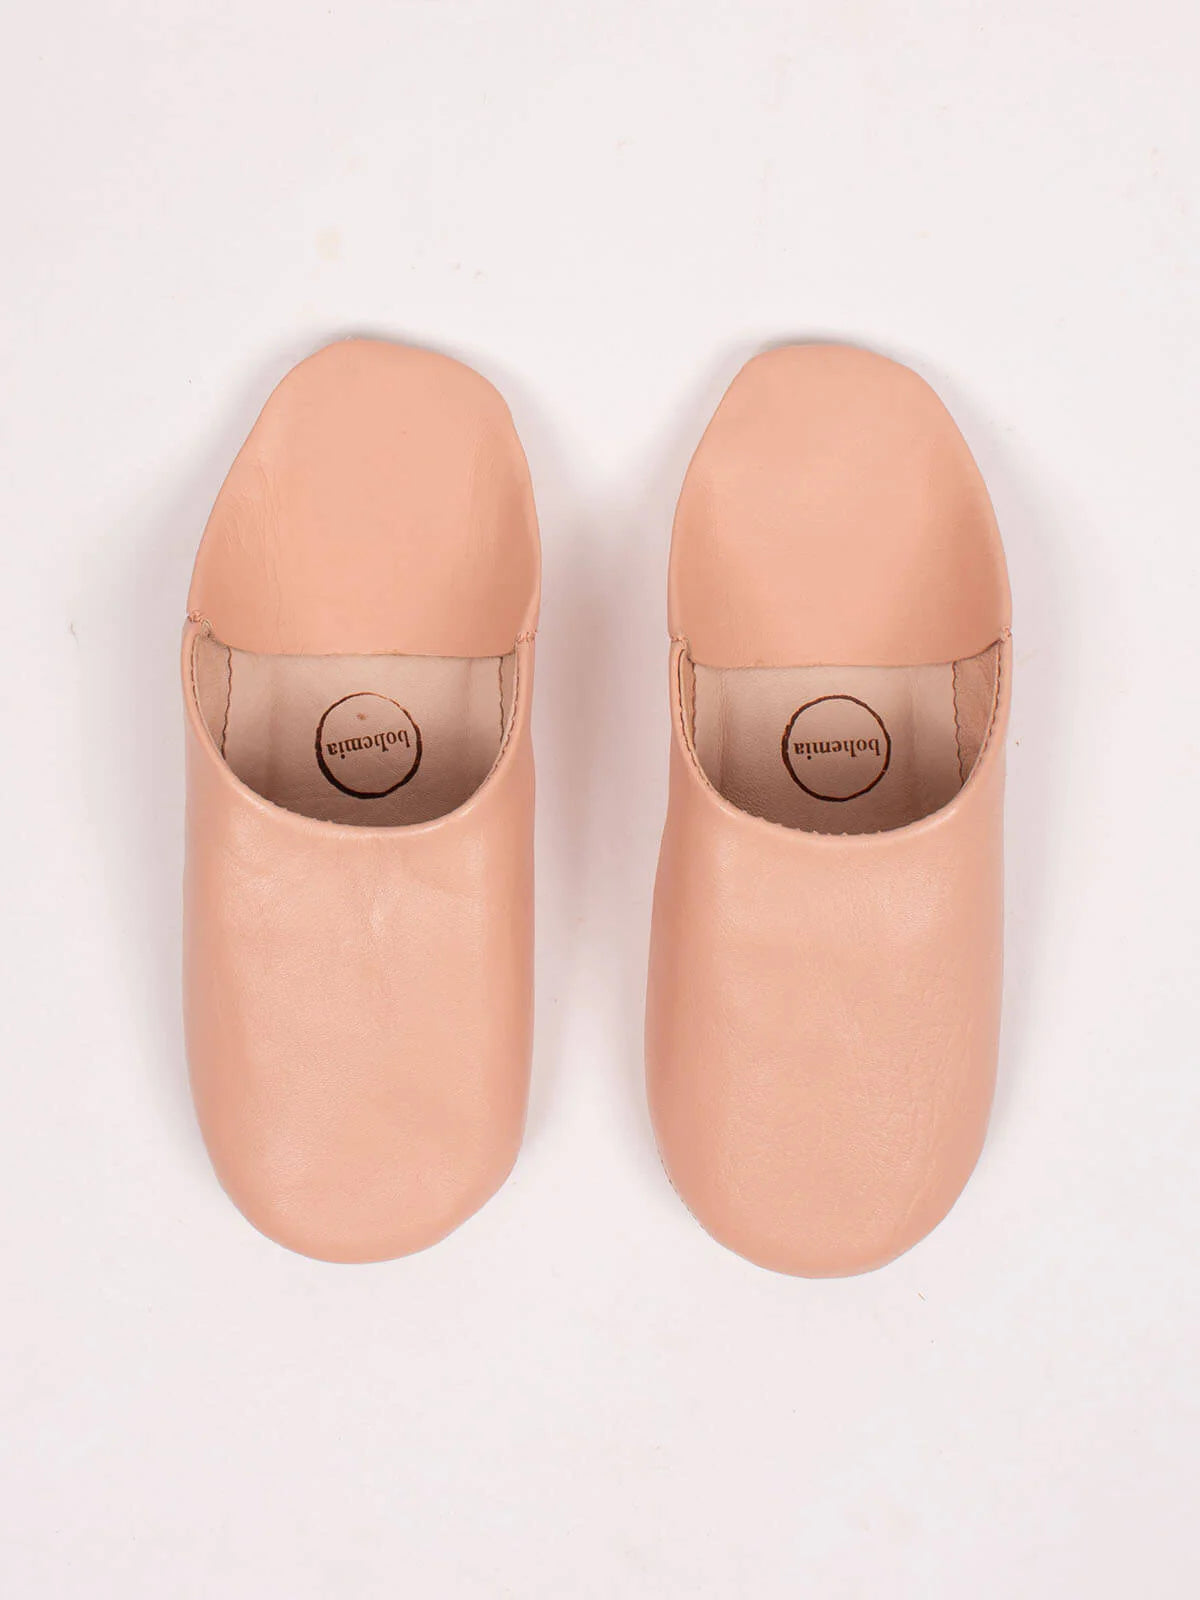 Moroccan Babouche Slippers - Ballet Pink